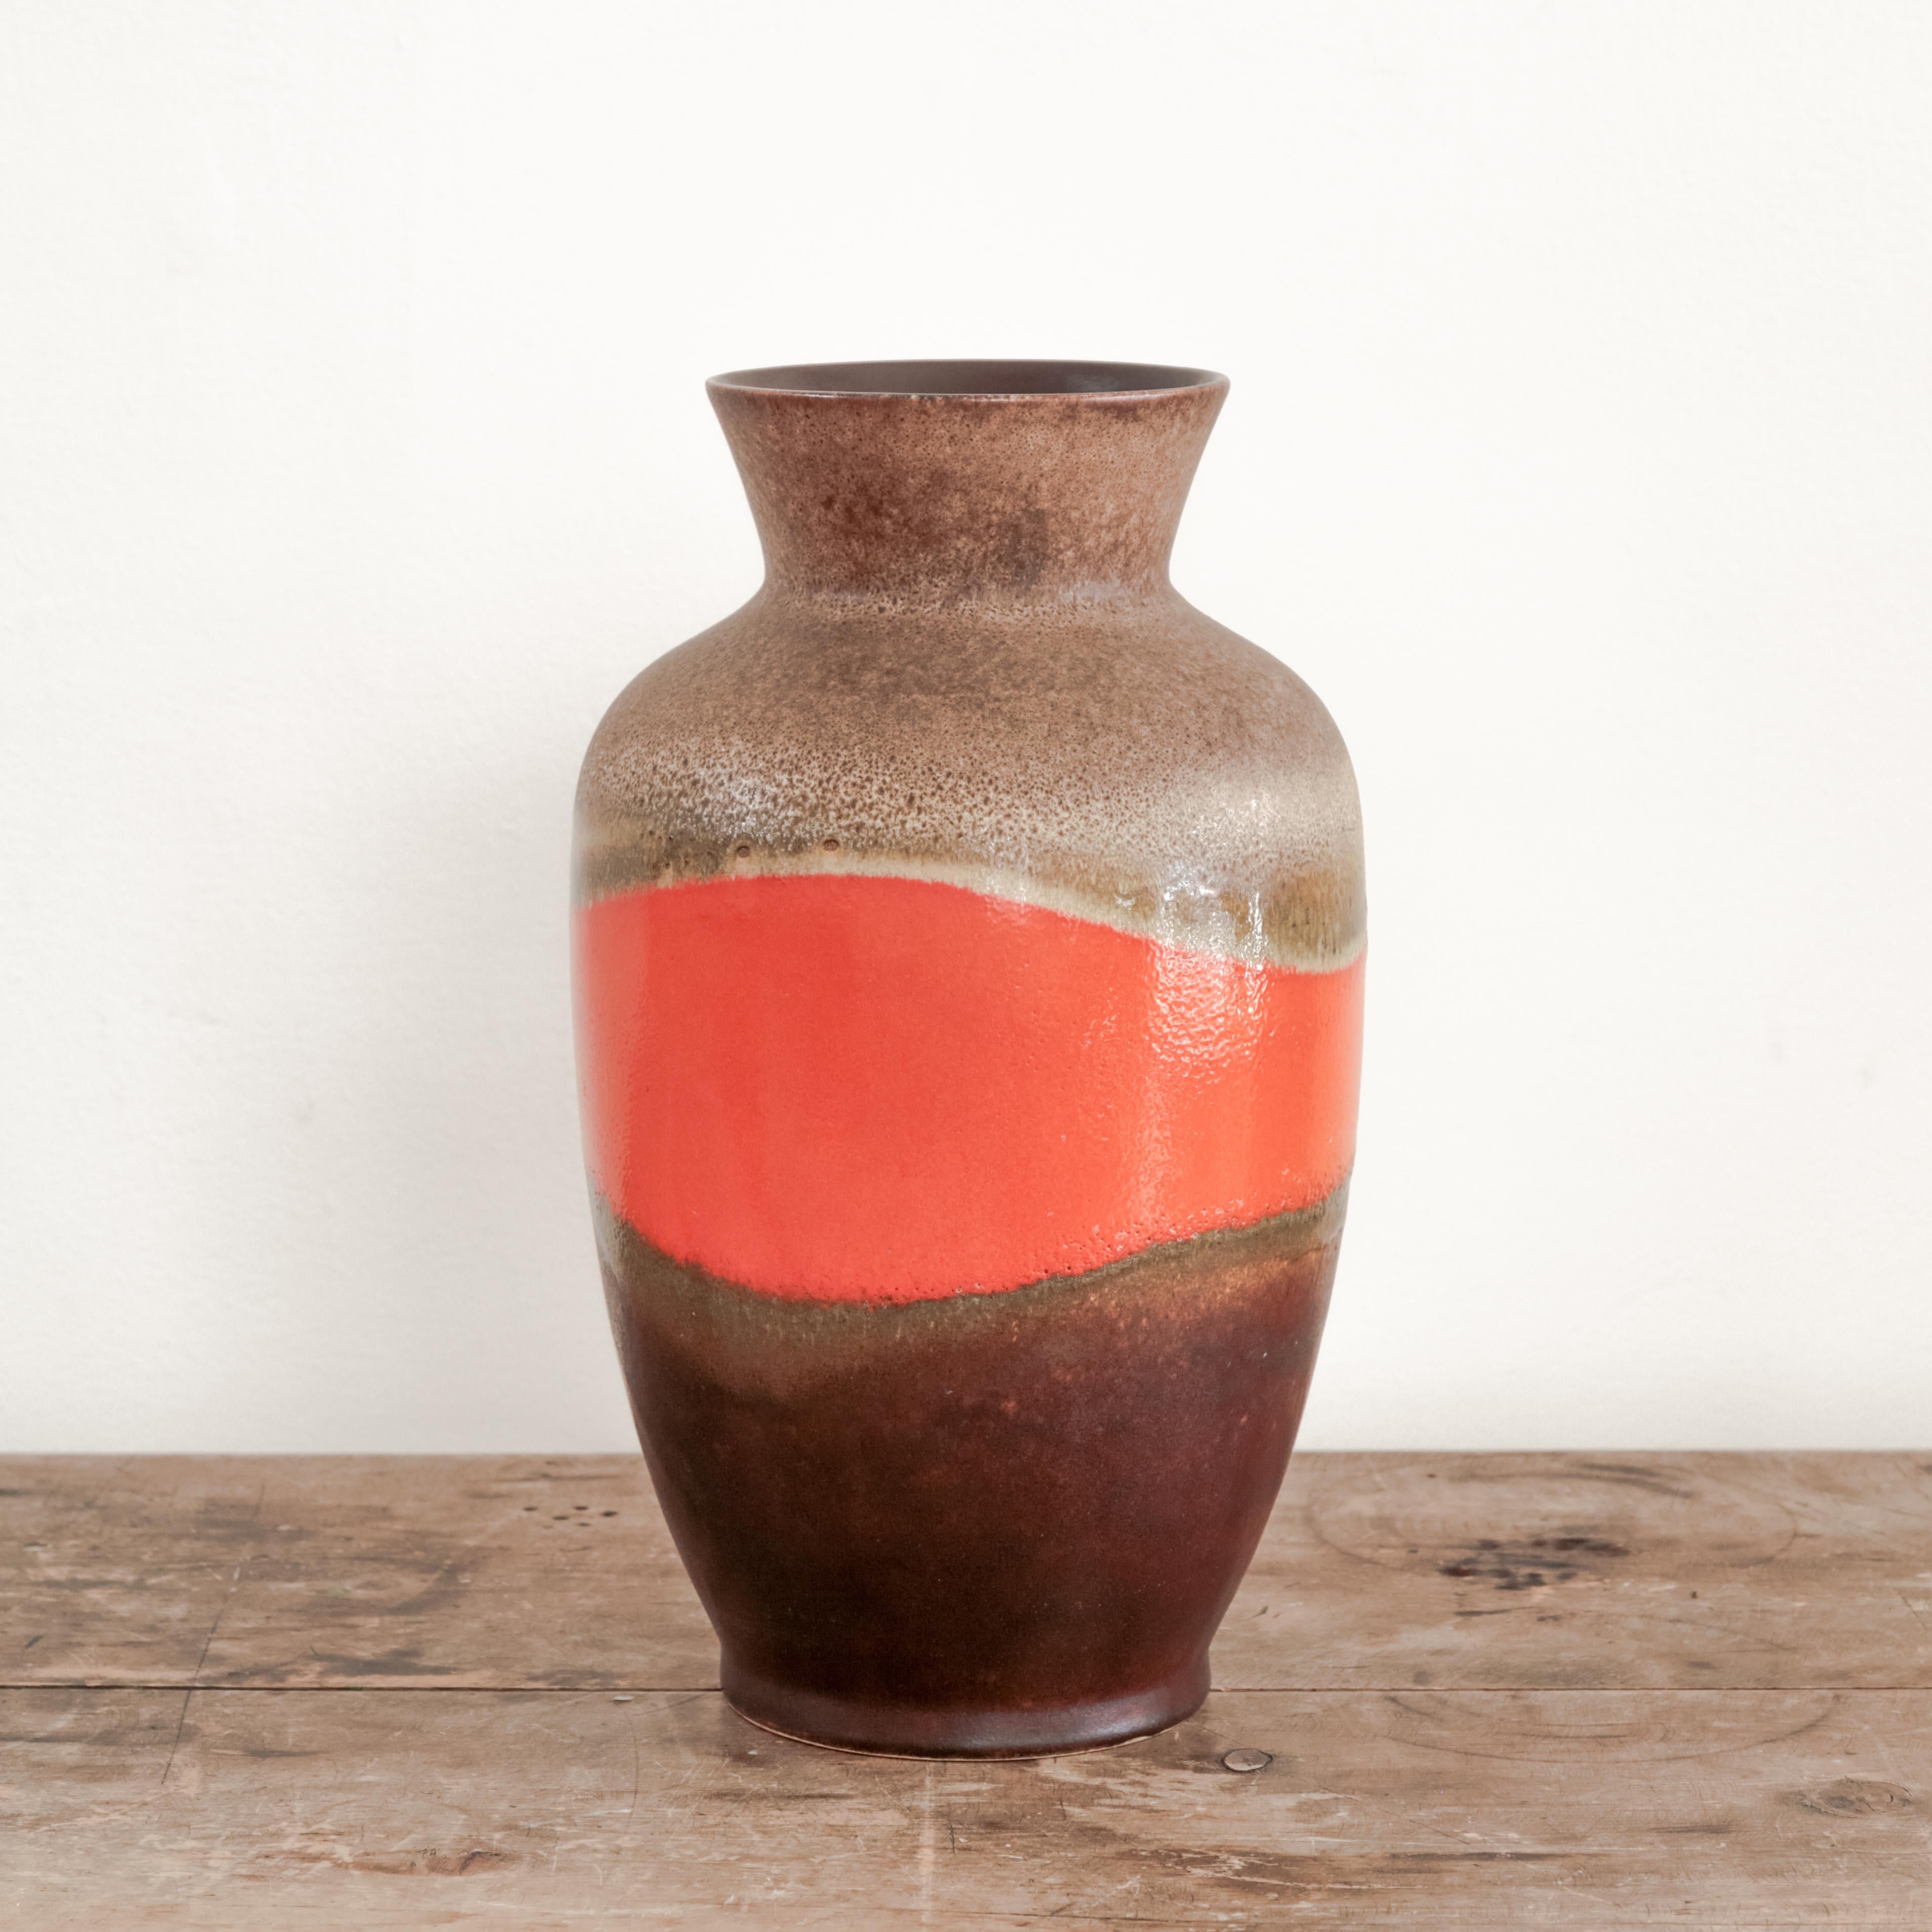 Ceramic vase with flared lip top and brown and orange glazing with banding detail, West Germany circa 1970's.